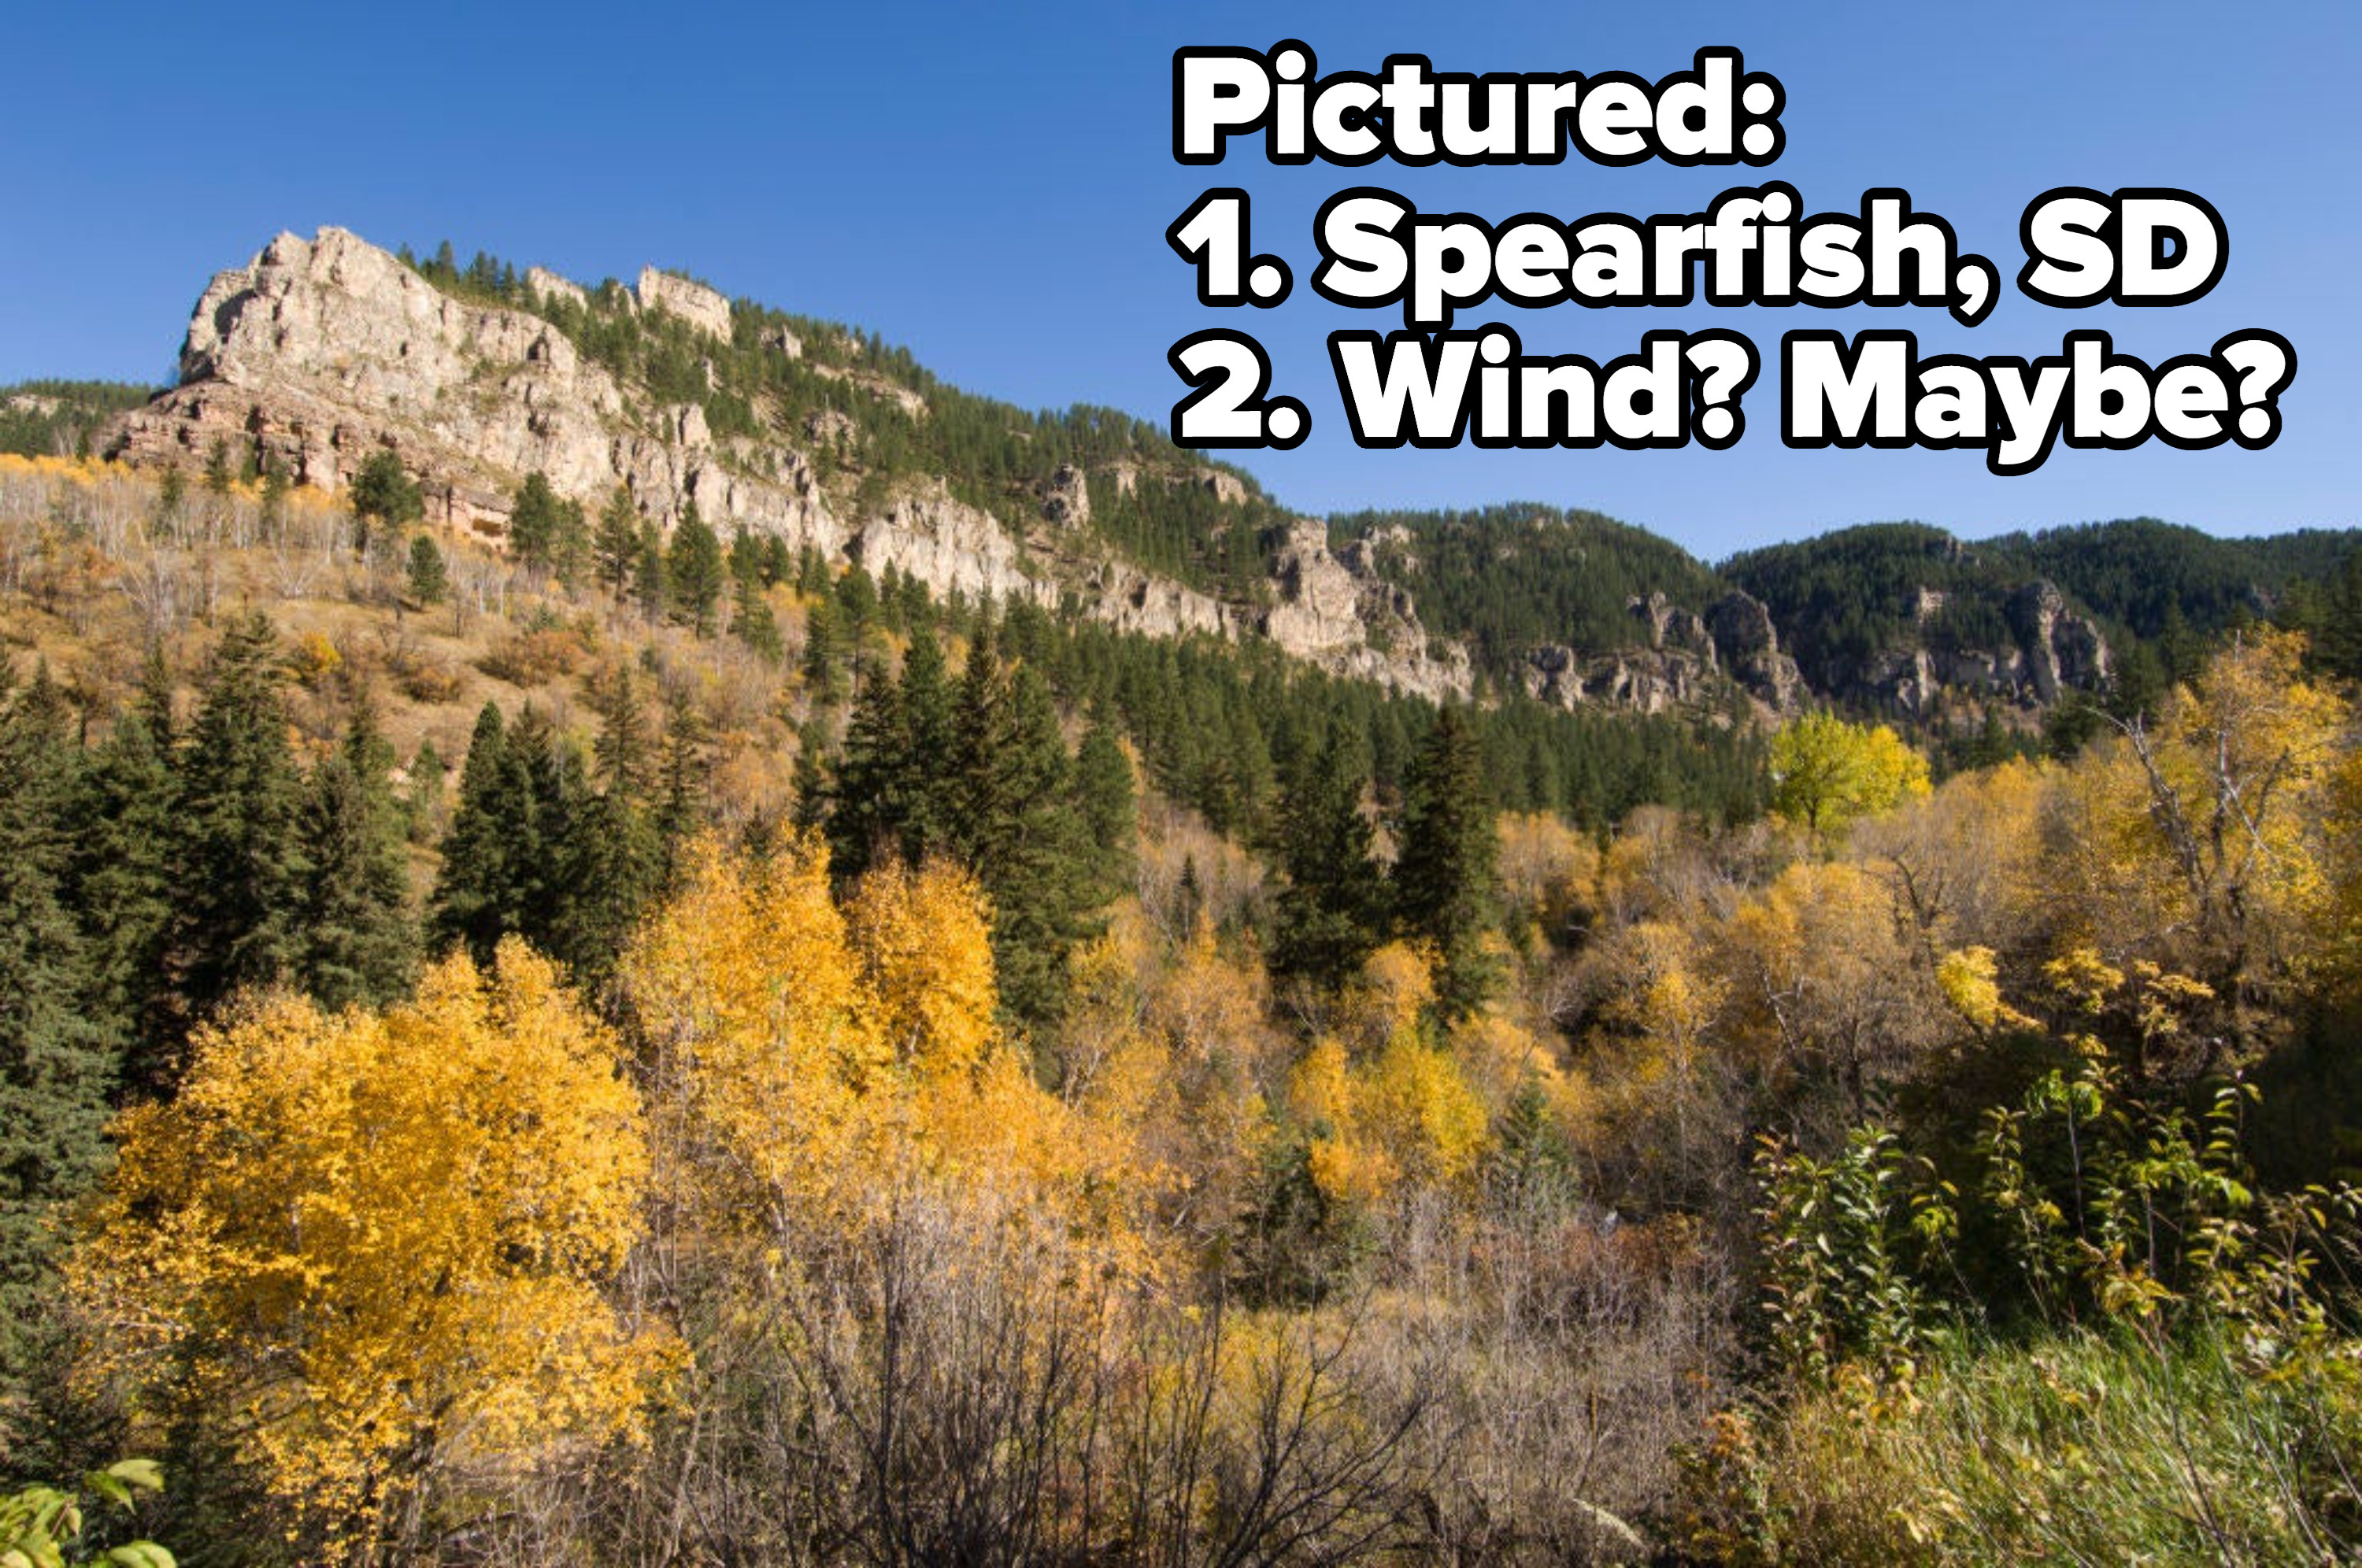 the landscape of Spearfish, with caption: Pictured: 1. Spearfish, ND2. Wind? Maybe?